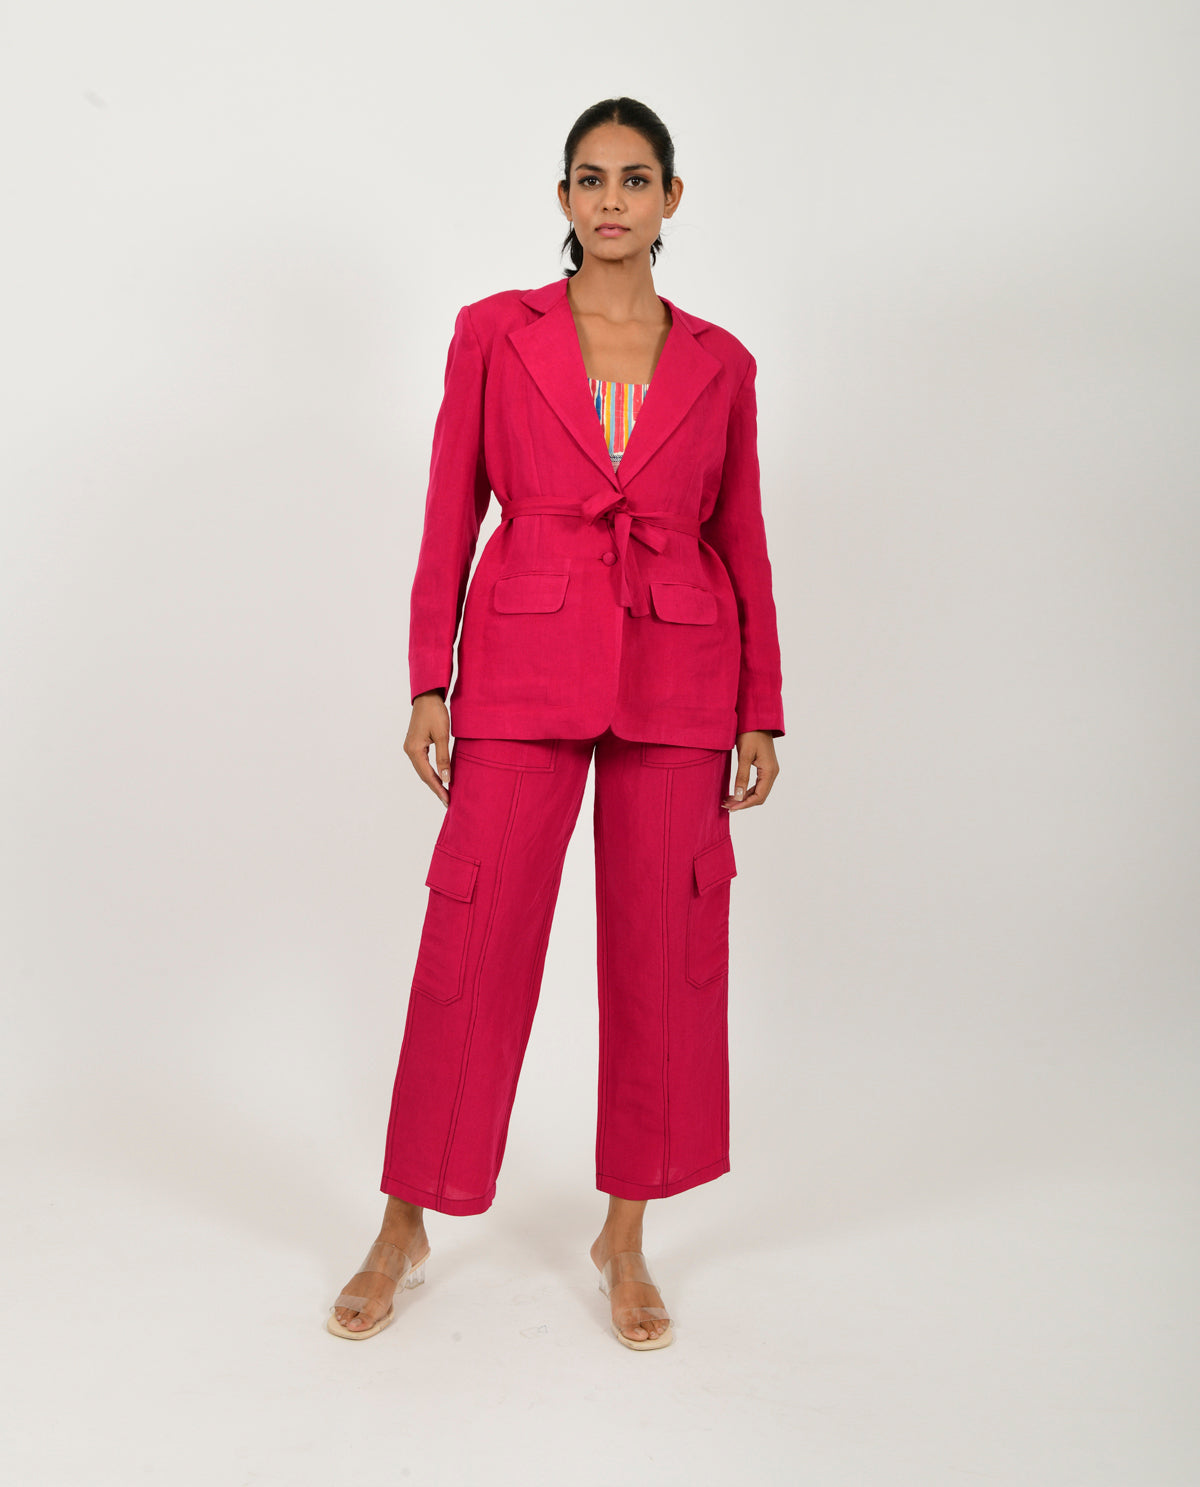 Pink Linen Tri Set by Rias Jaipur with Co-ord Sets, Linen Blend, Natural, Office Wear, Office Wear Co-ords, Pink, Regular Fit, Solids, Womenswear, Yaadein, Yaadein by Rias Jaipur at Kamakhyaa for sustainable fashion